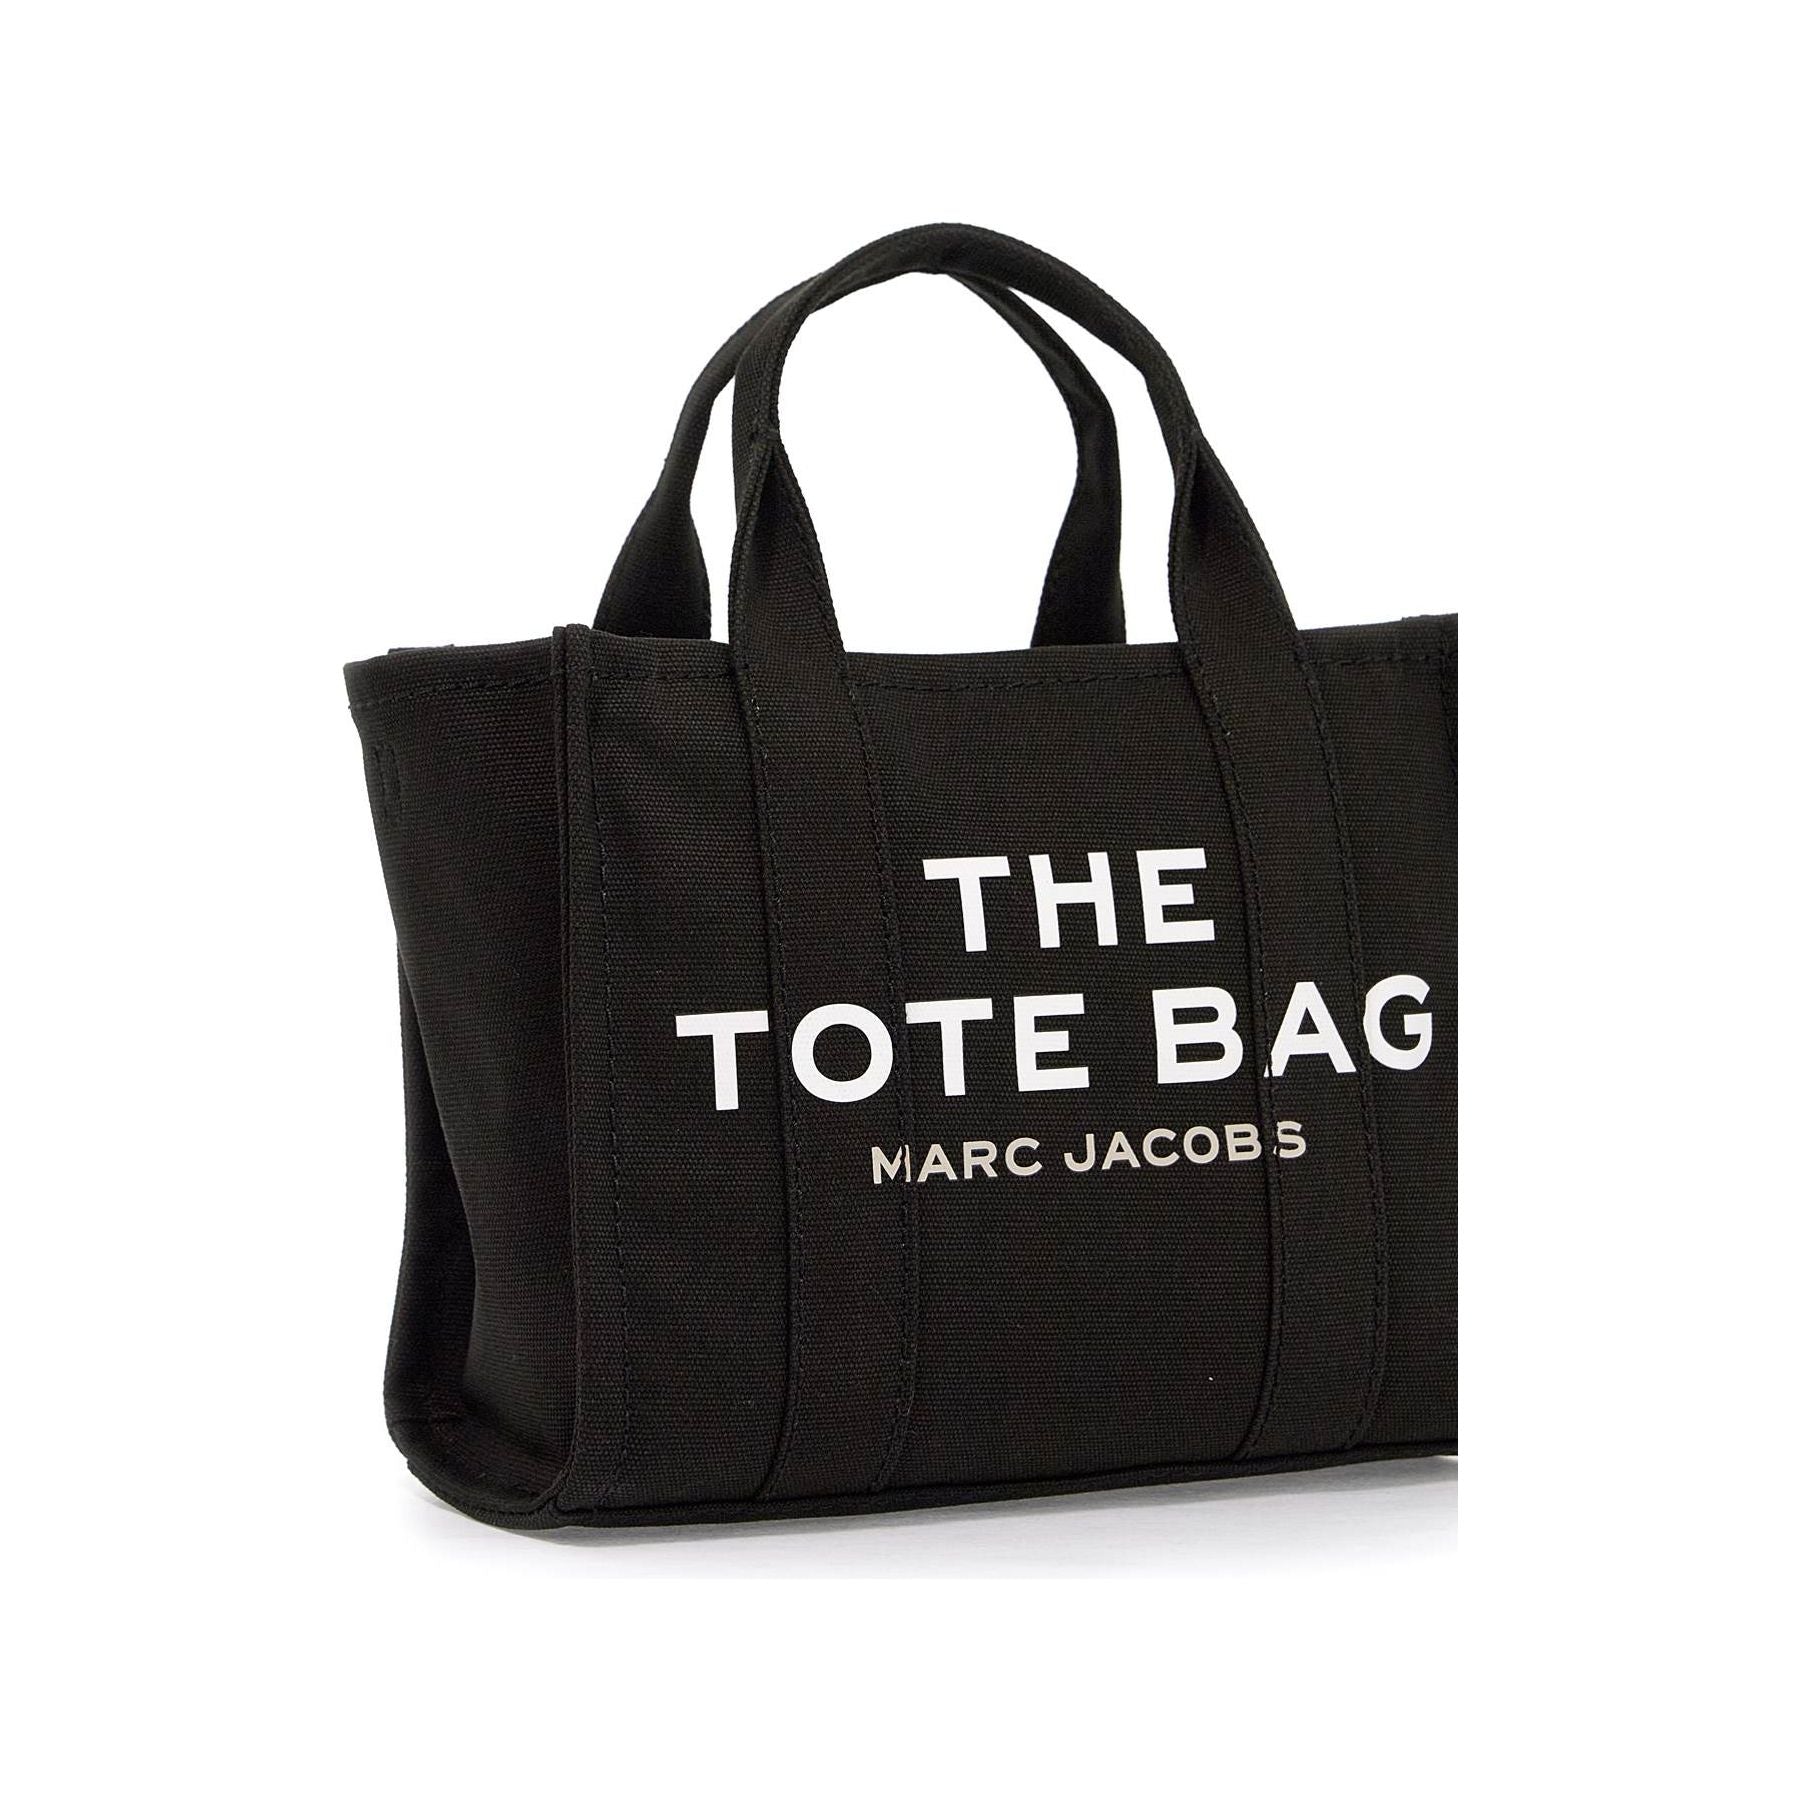 The Canvas Small Tote Bag